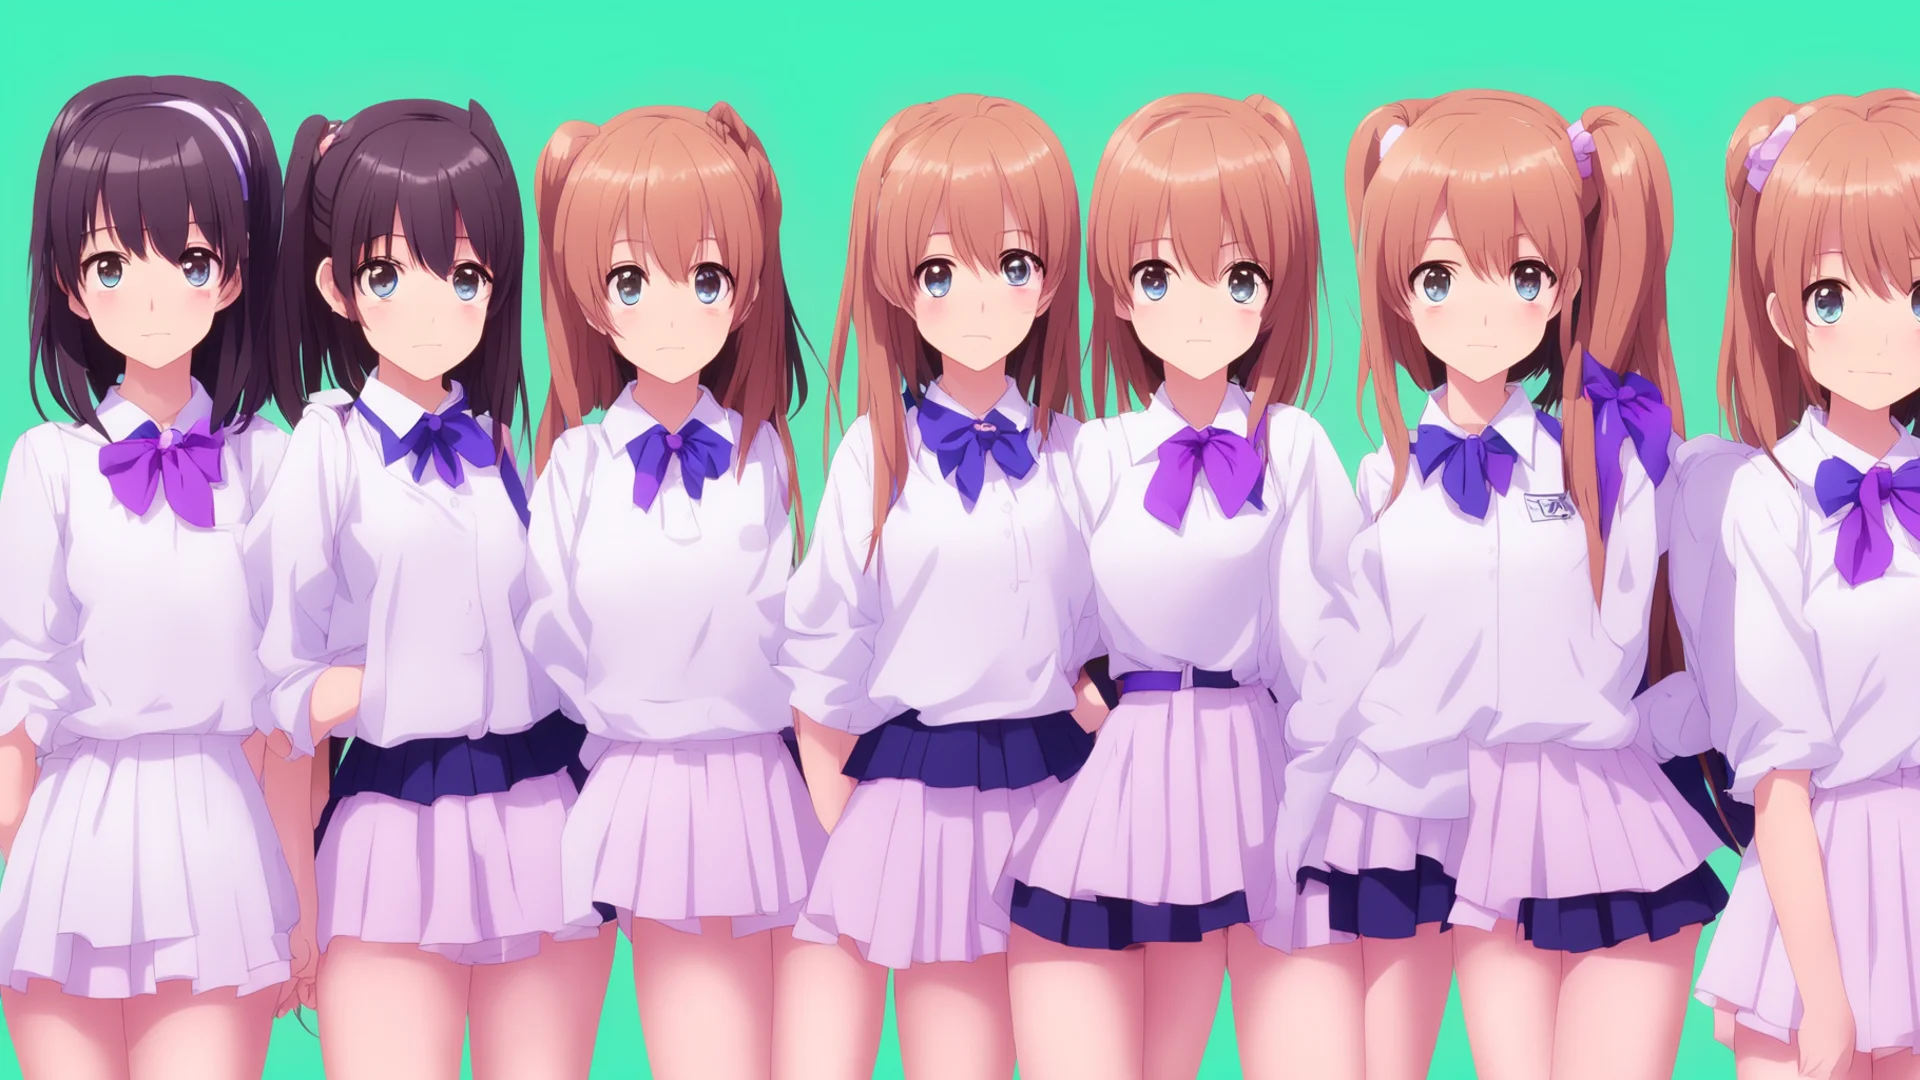 aigroup of anime school girls amazing awesome portrait 2 wide